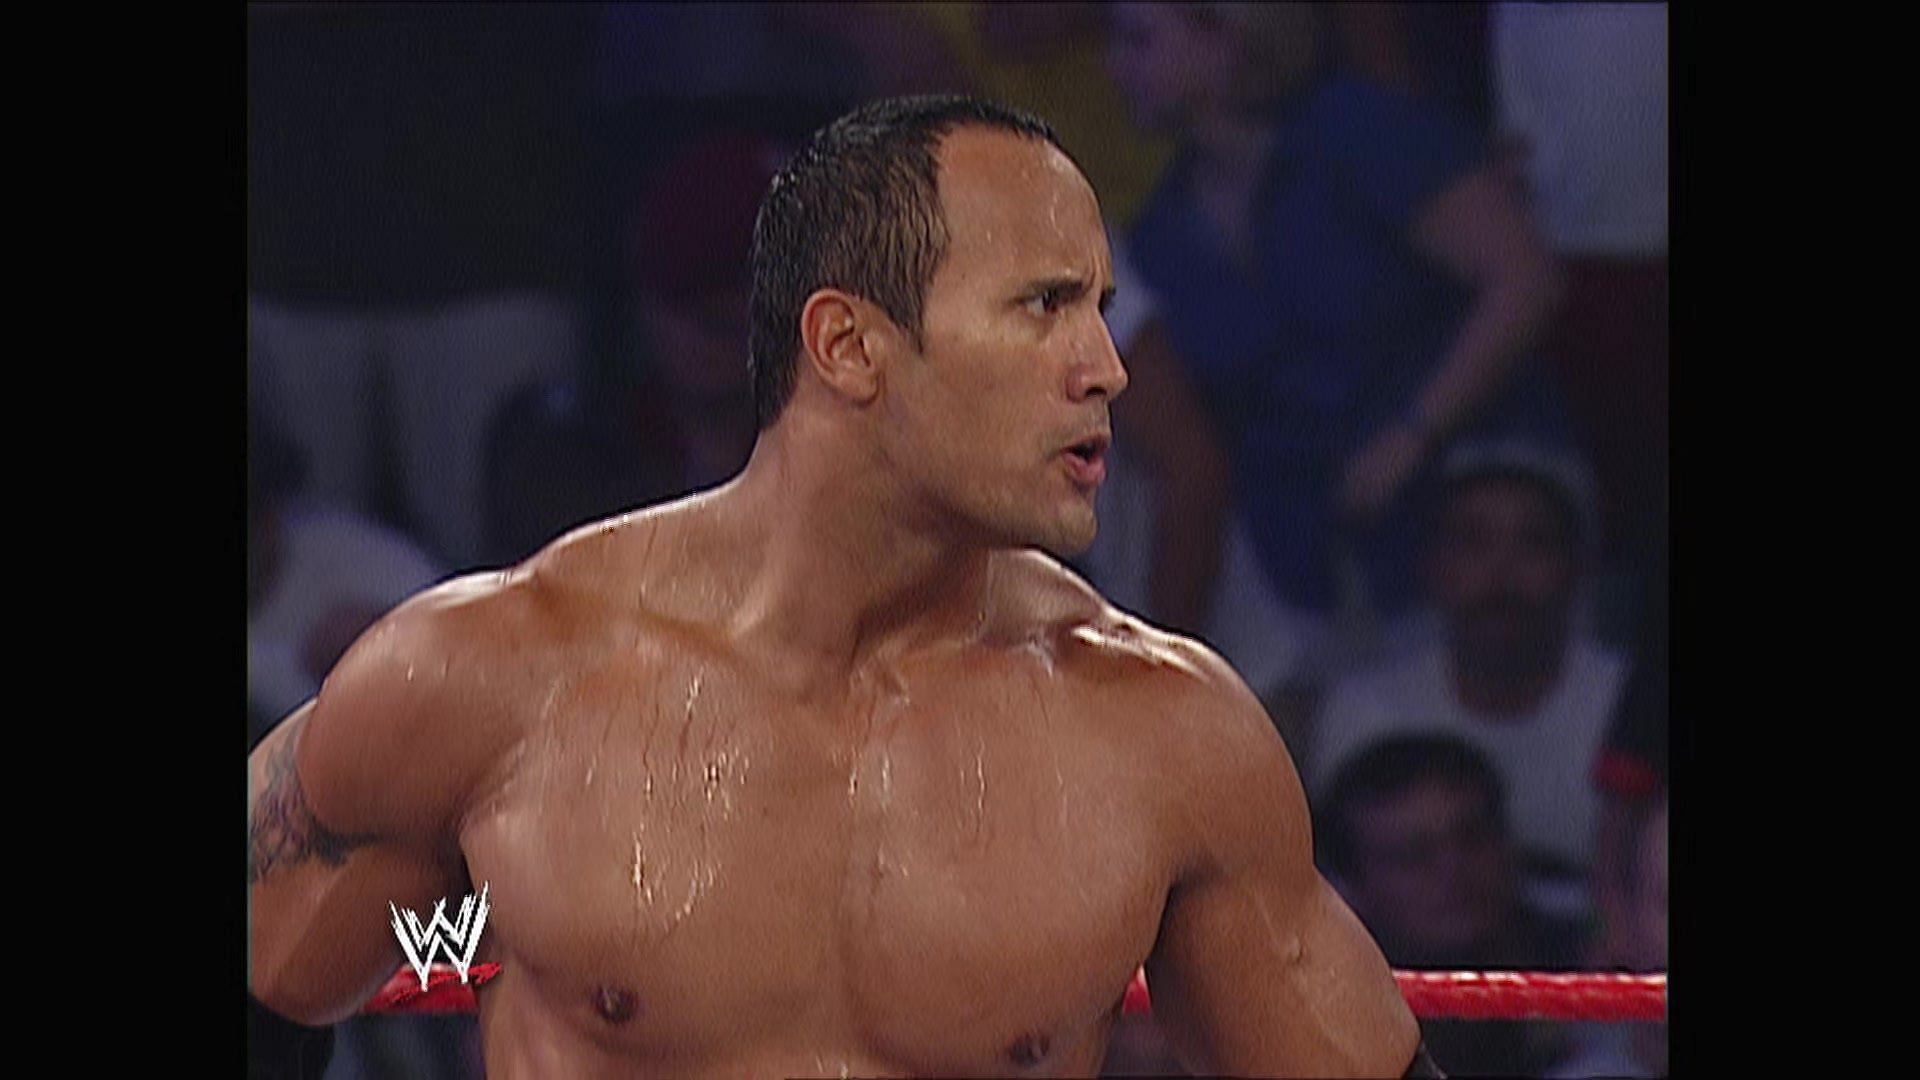 The Rock once won the Royal Rumble Match